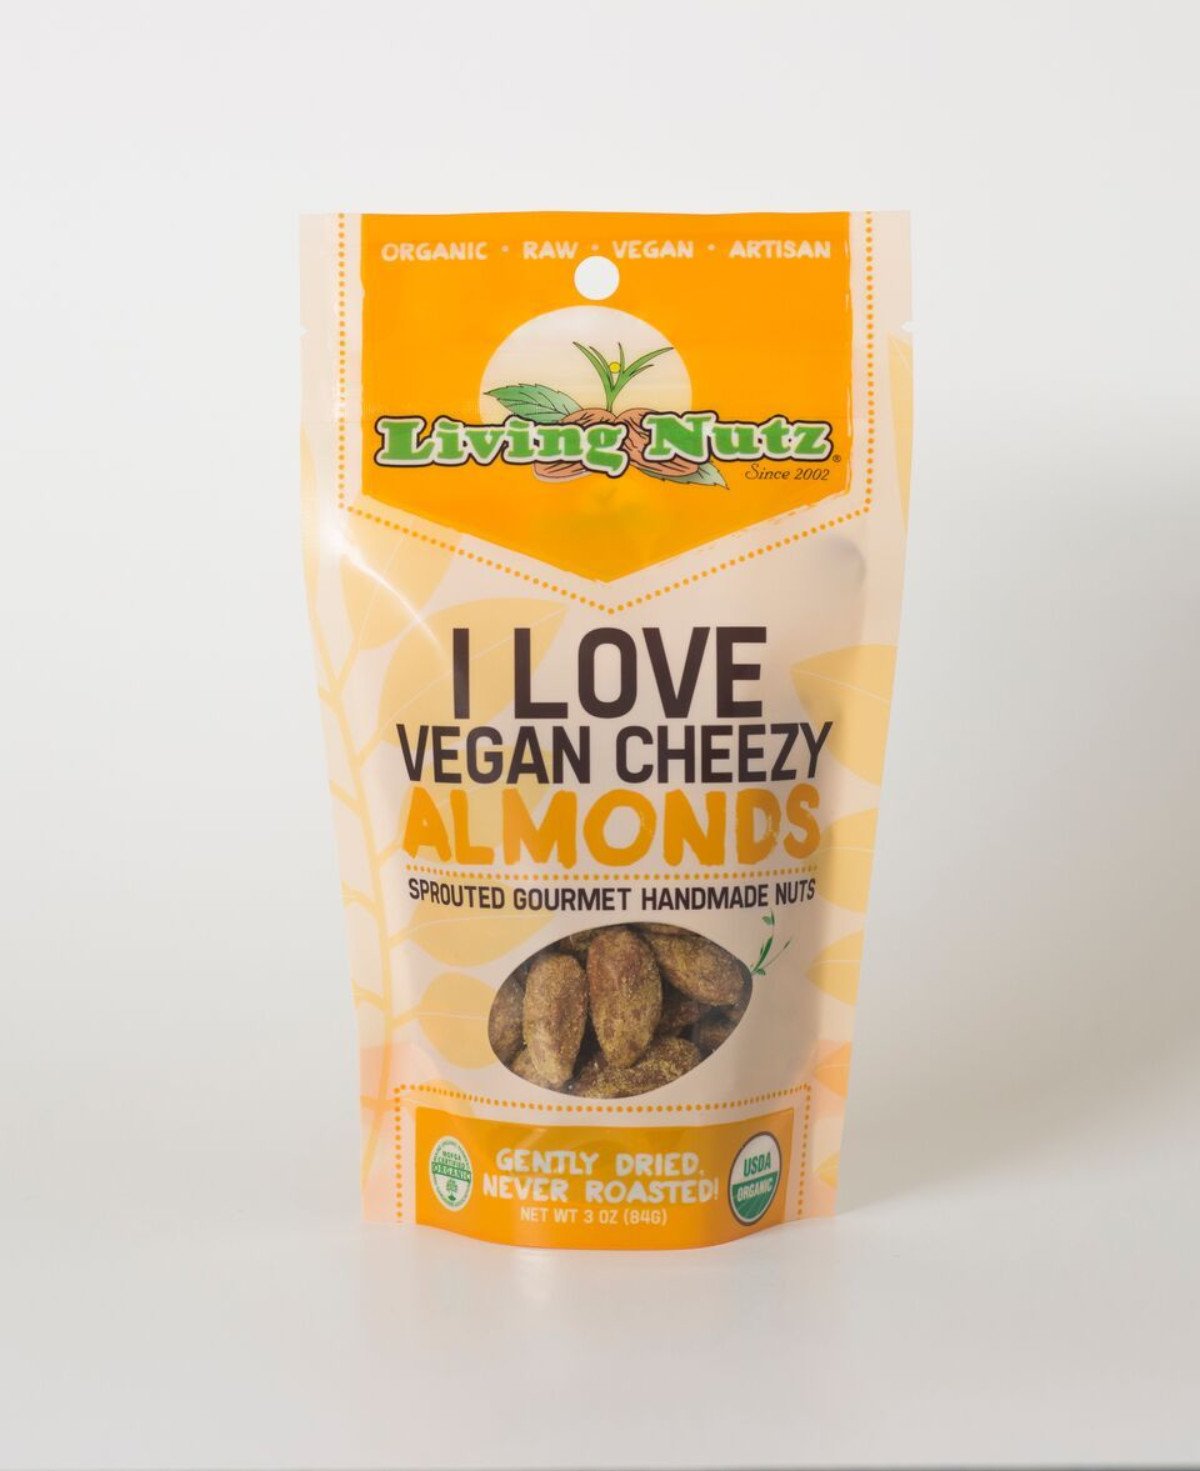 Organic raw sprouted nuts. Sprouted raw &amp; unpasteurized almonds vegan cheesy flavor. Living Nutz